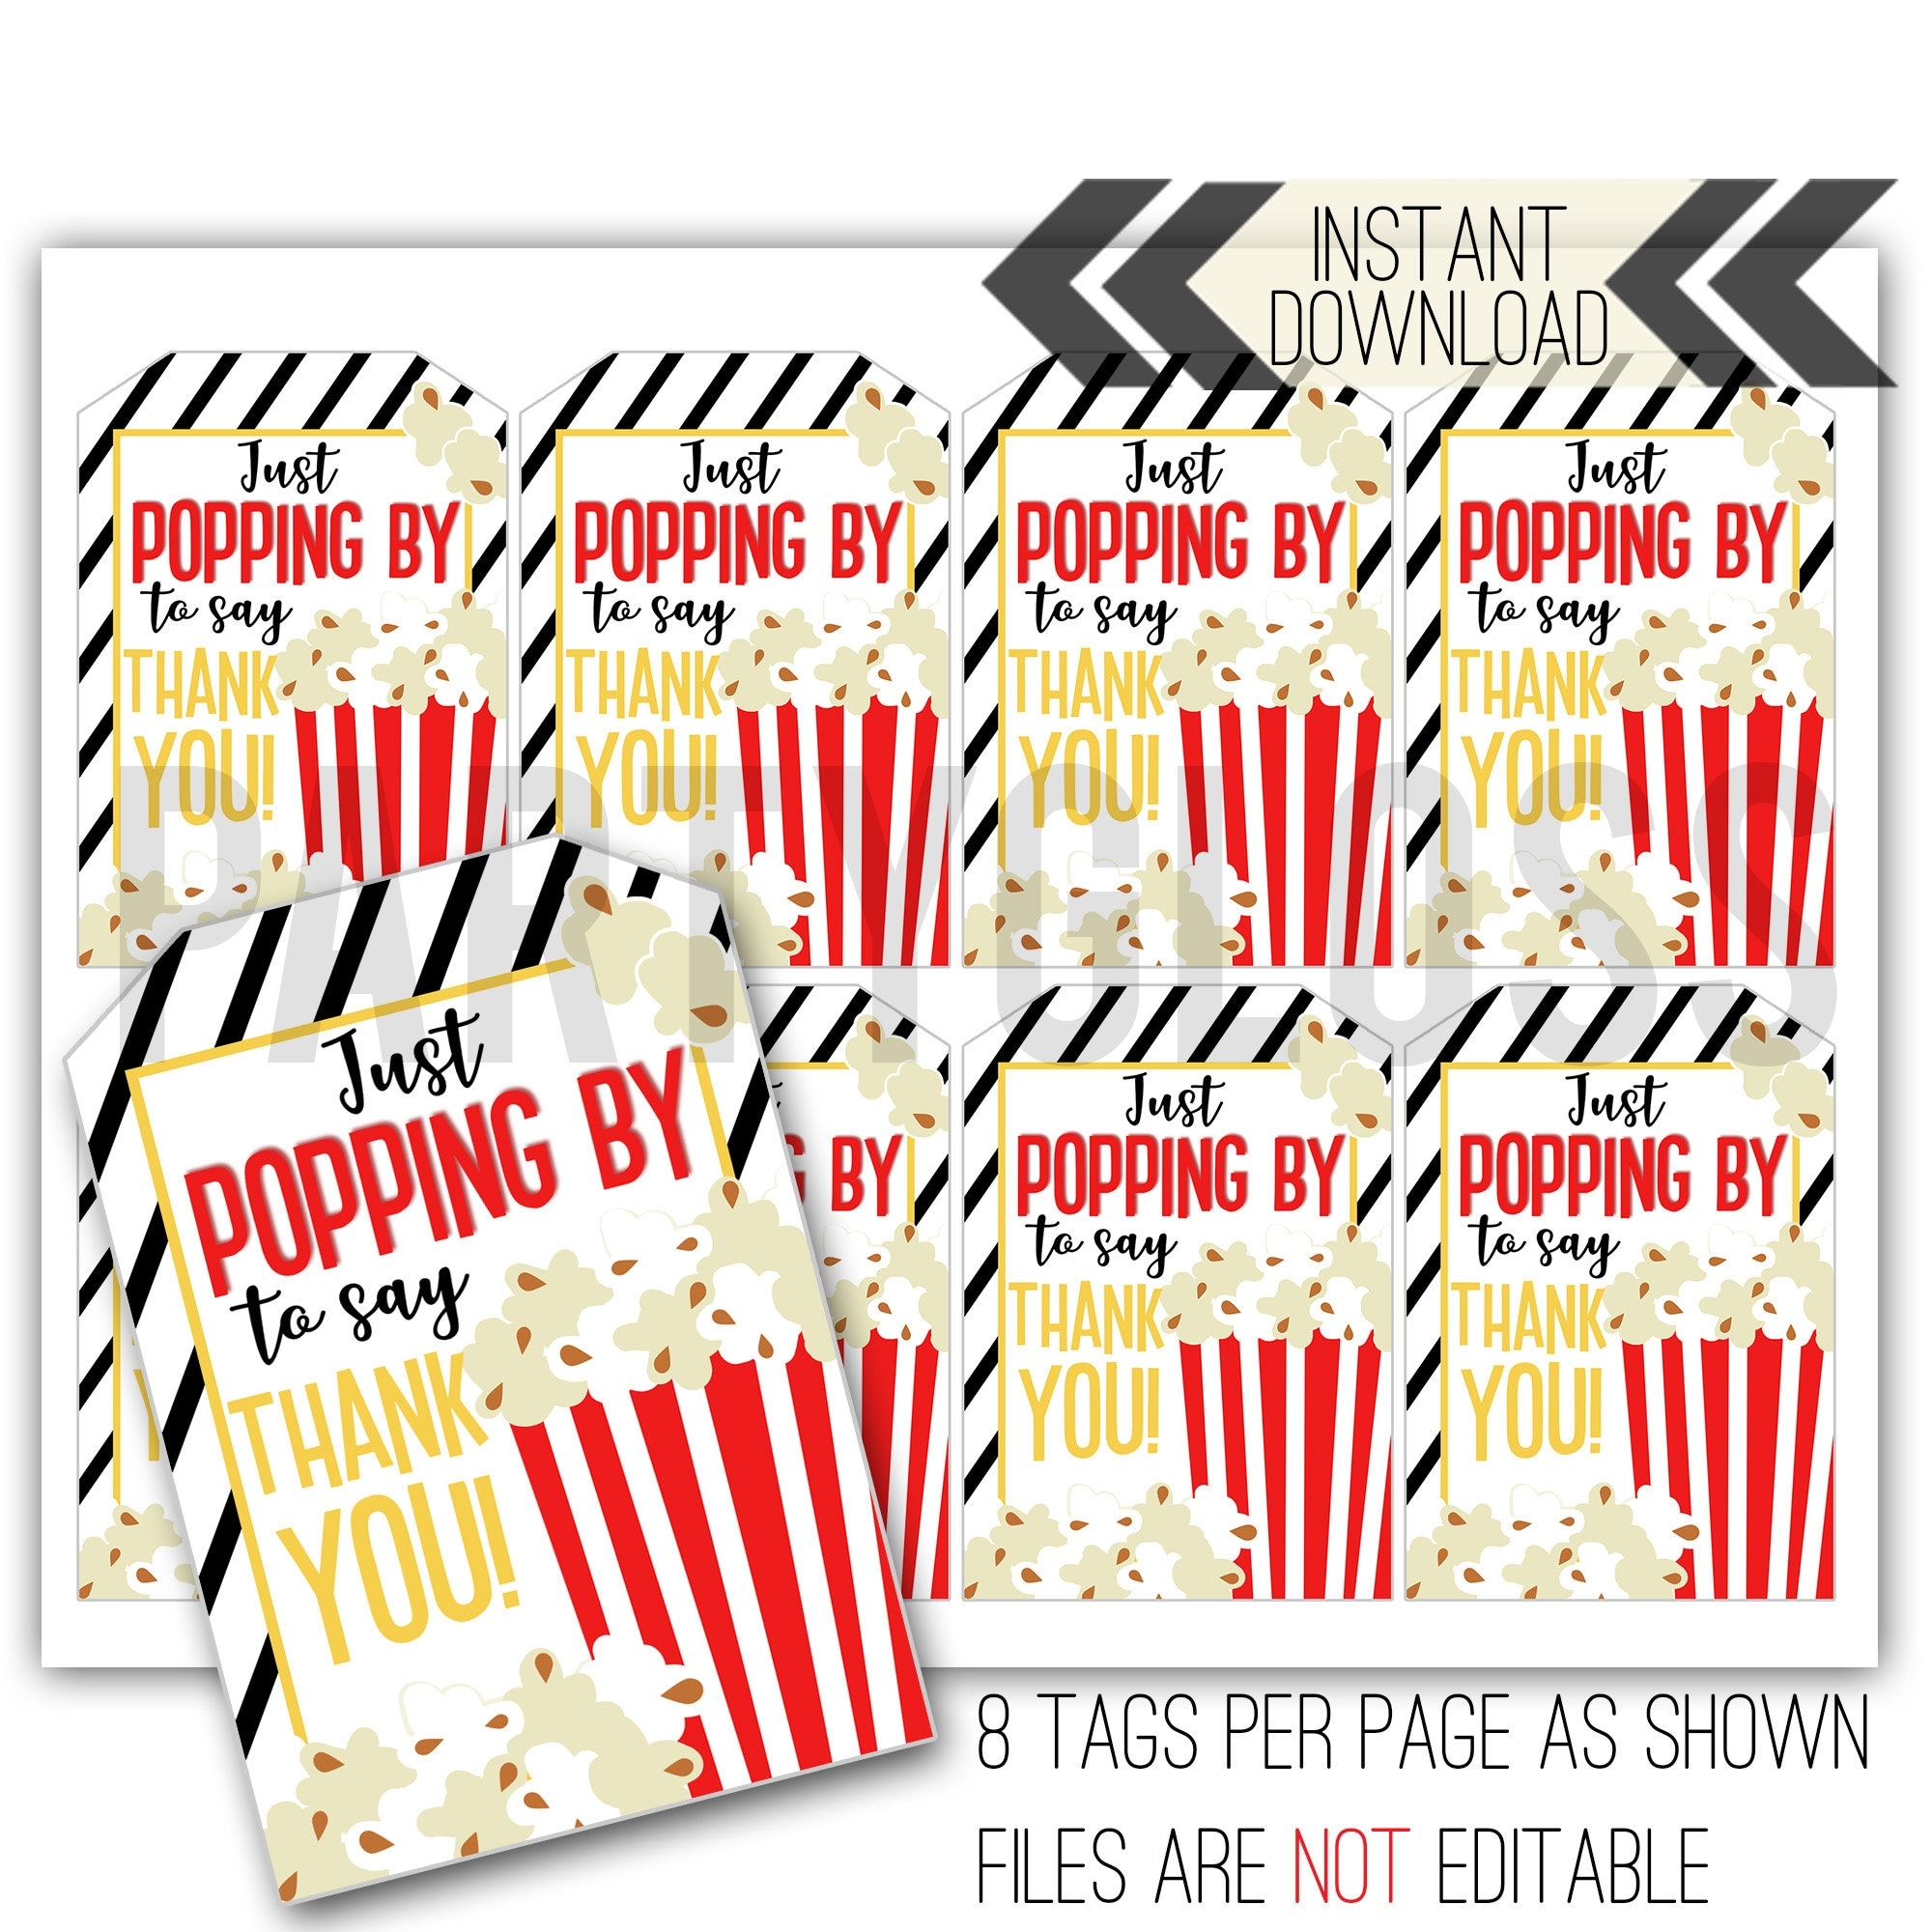 Thank You Popcorn Appreciation Printable Gift Tags Just Popping By Employee Staff Team Client Customer PTA PTO Teacher Real Estate Mortgage Etsy